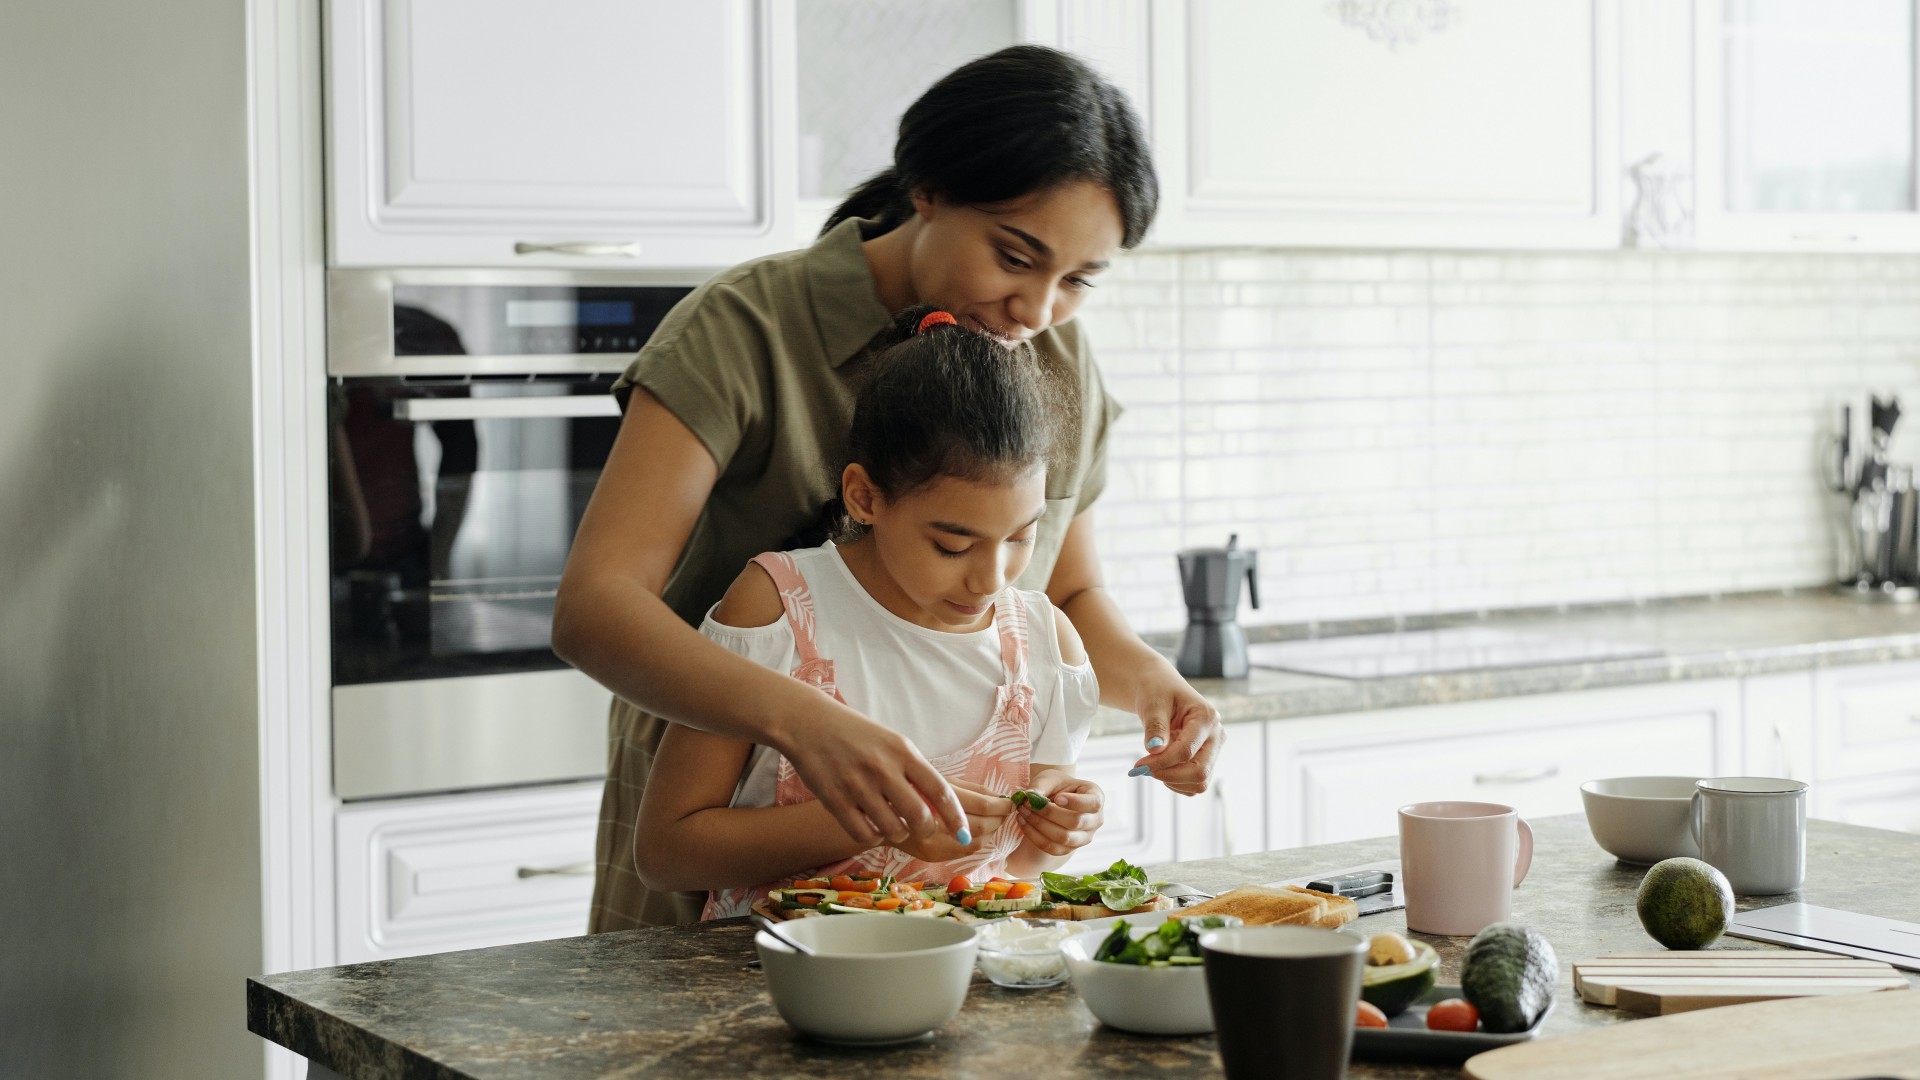 Mother and child prepare lunch together in a sunny kitchen; Photo by August de Richelieu from Pexels